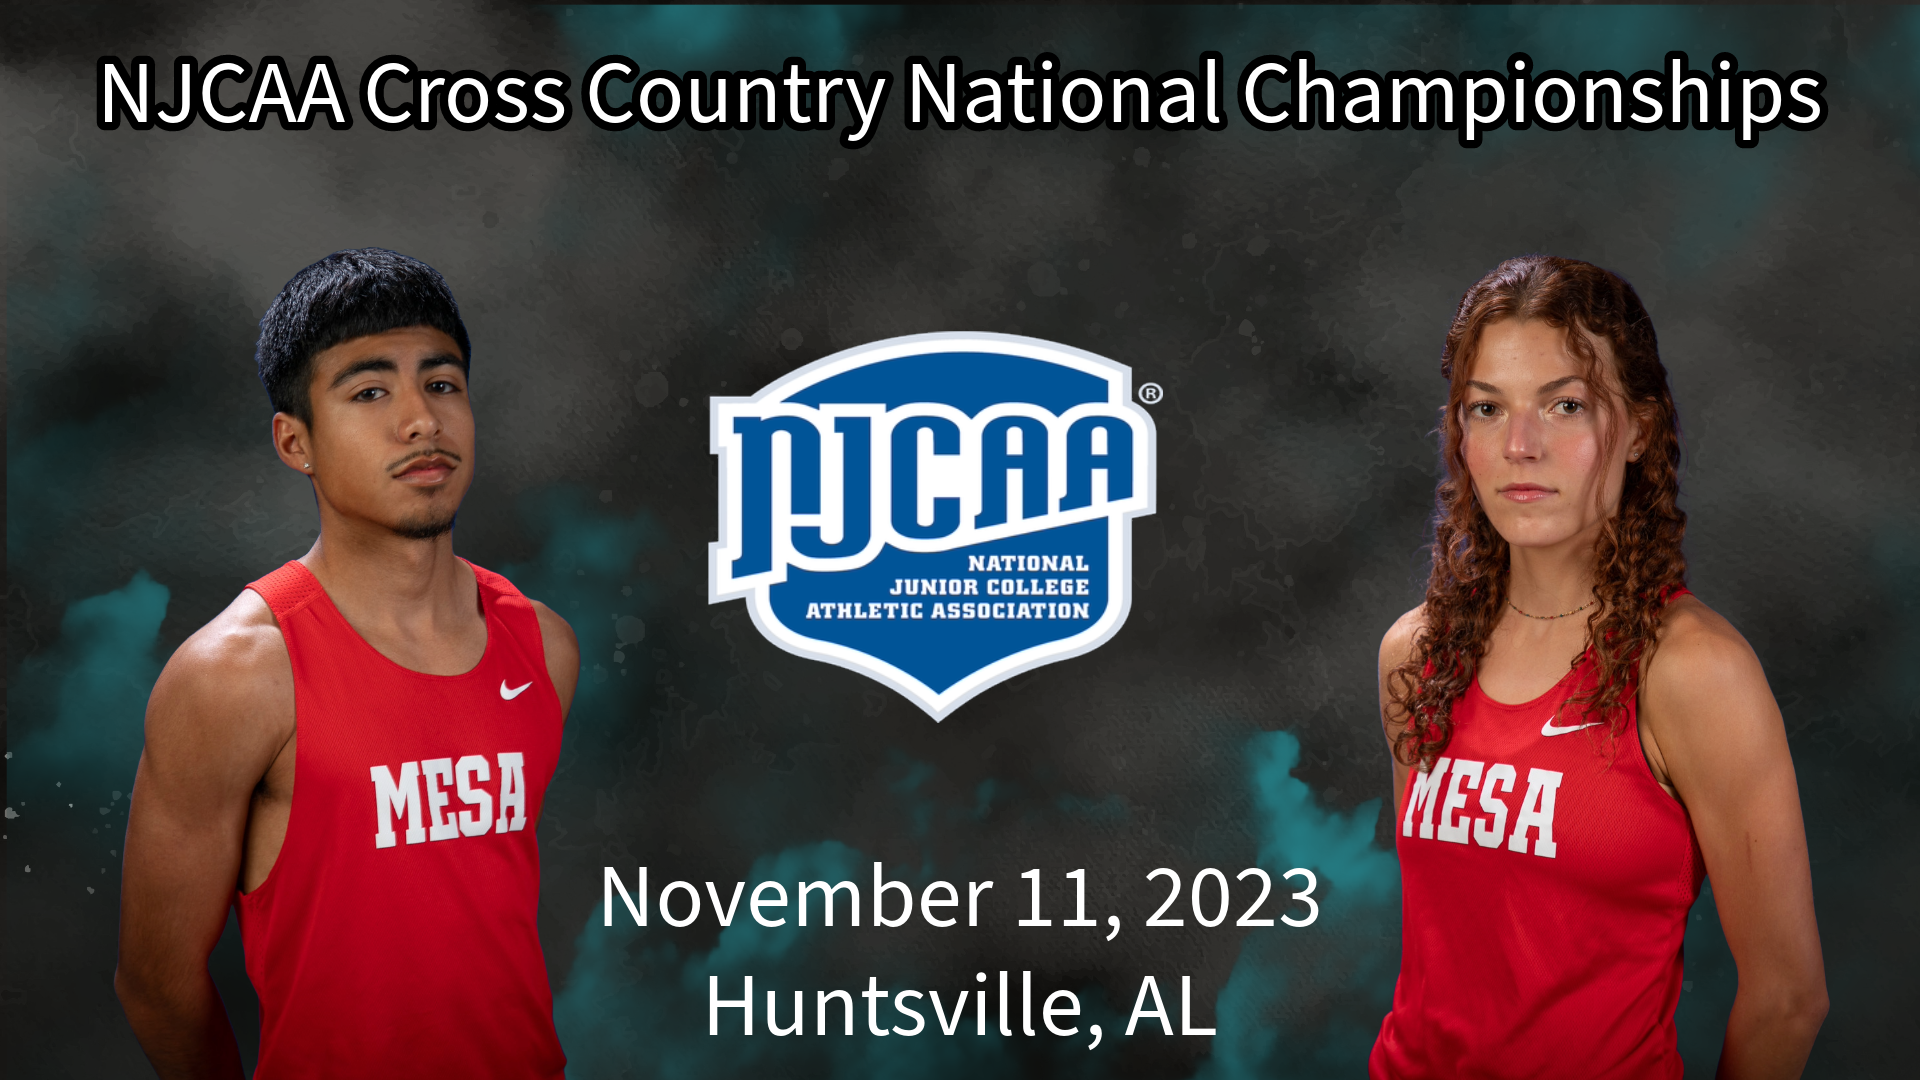 Mesa Cross Country competes at National Championships on Saturday